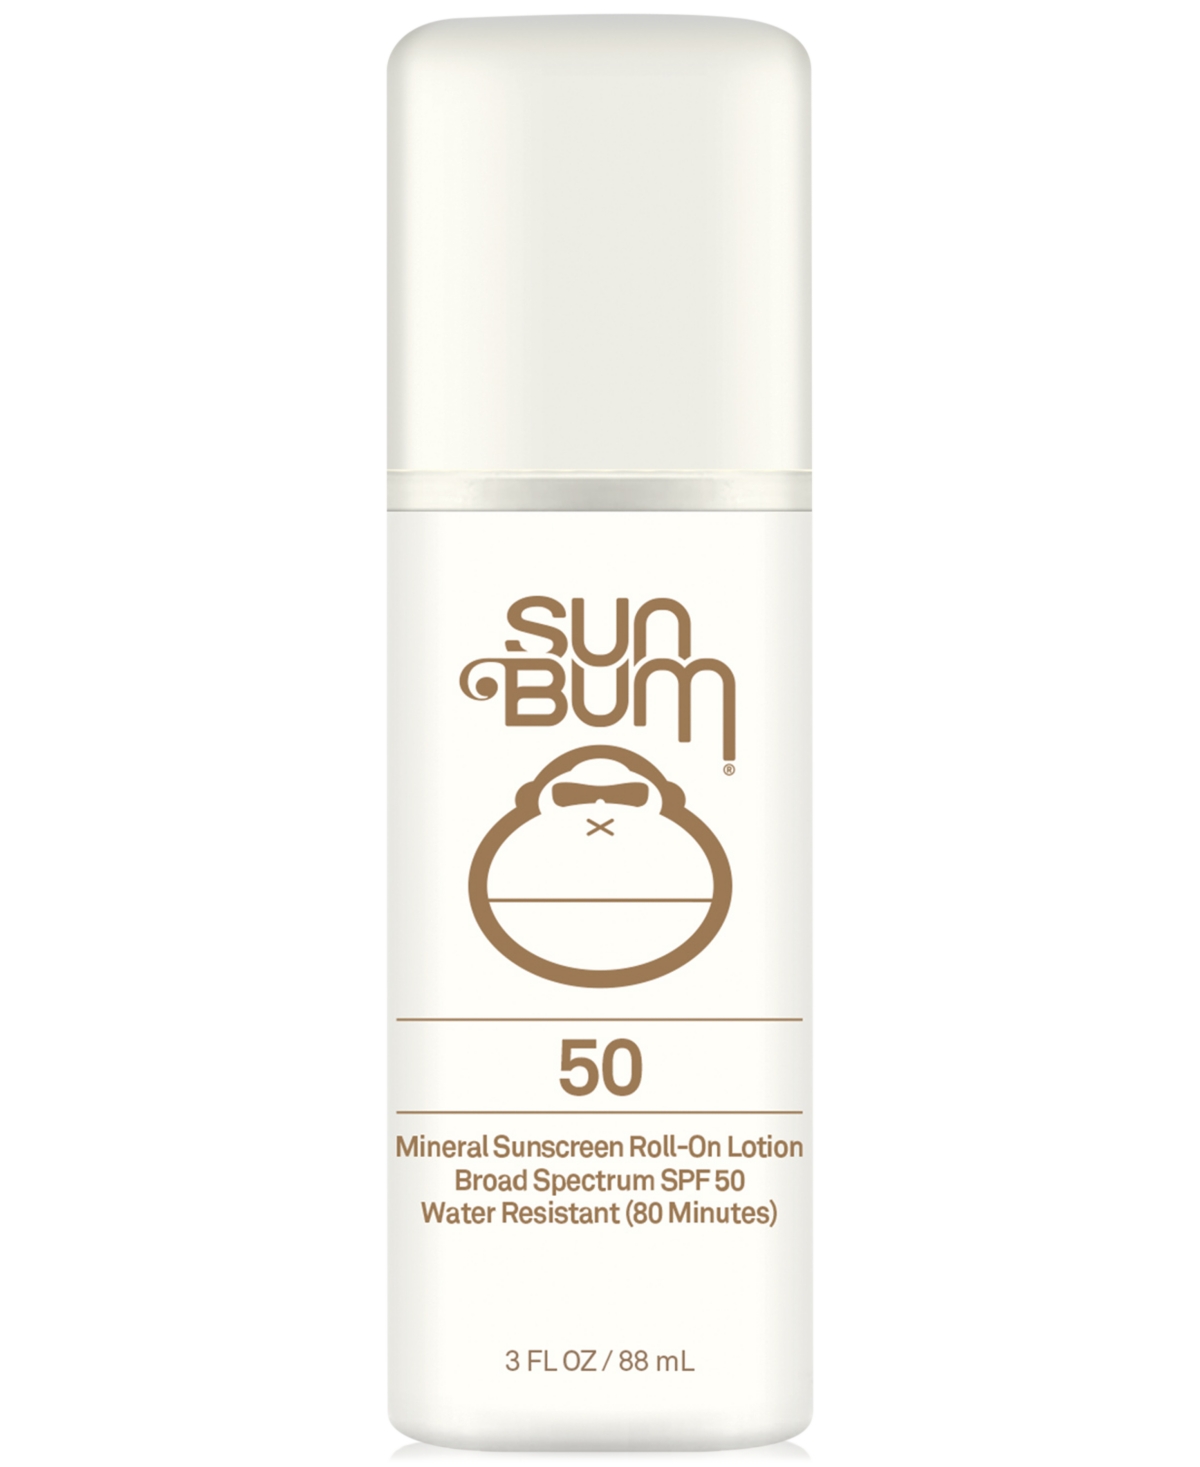 Mineral Sunscreen Roll-On Lotion Spf 50